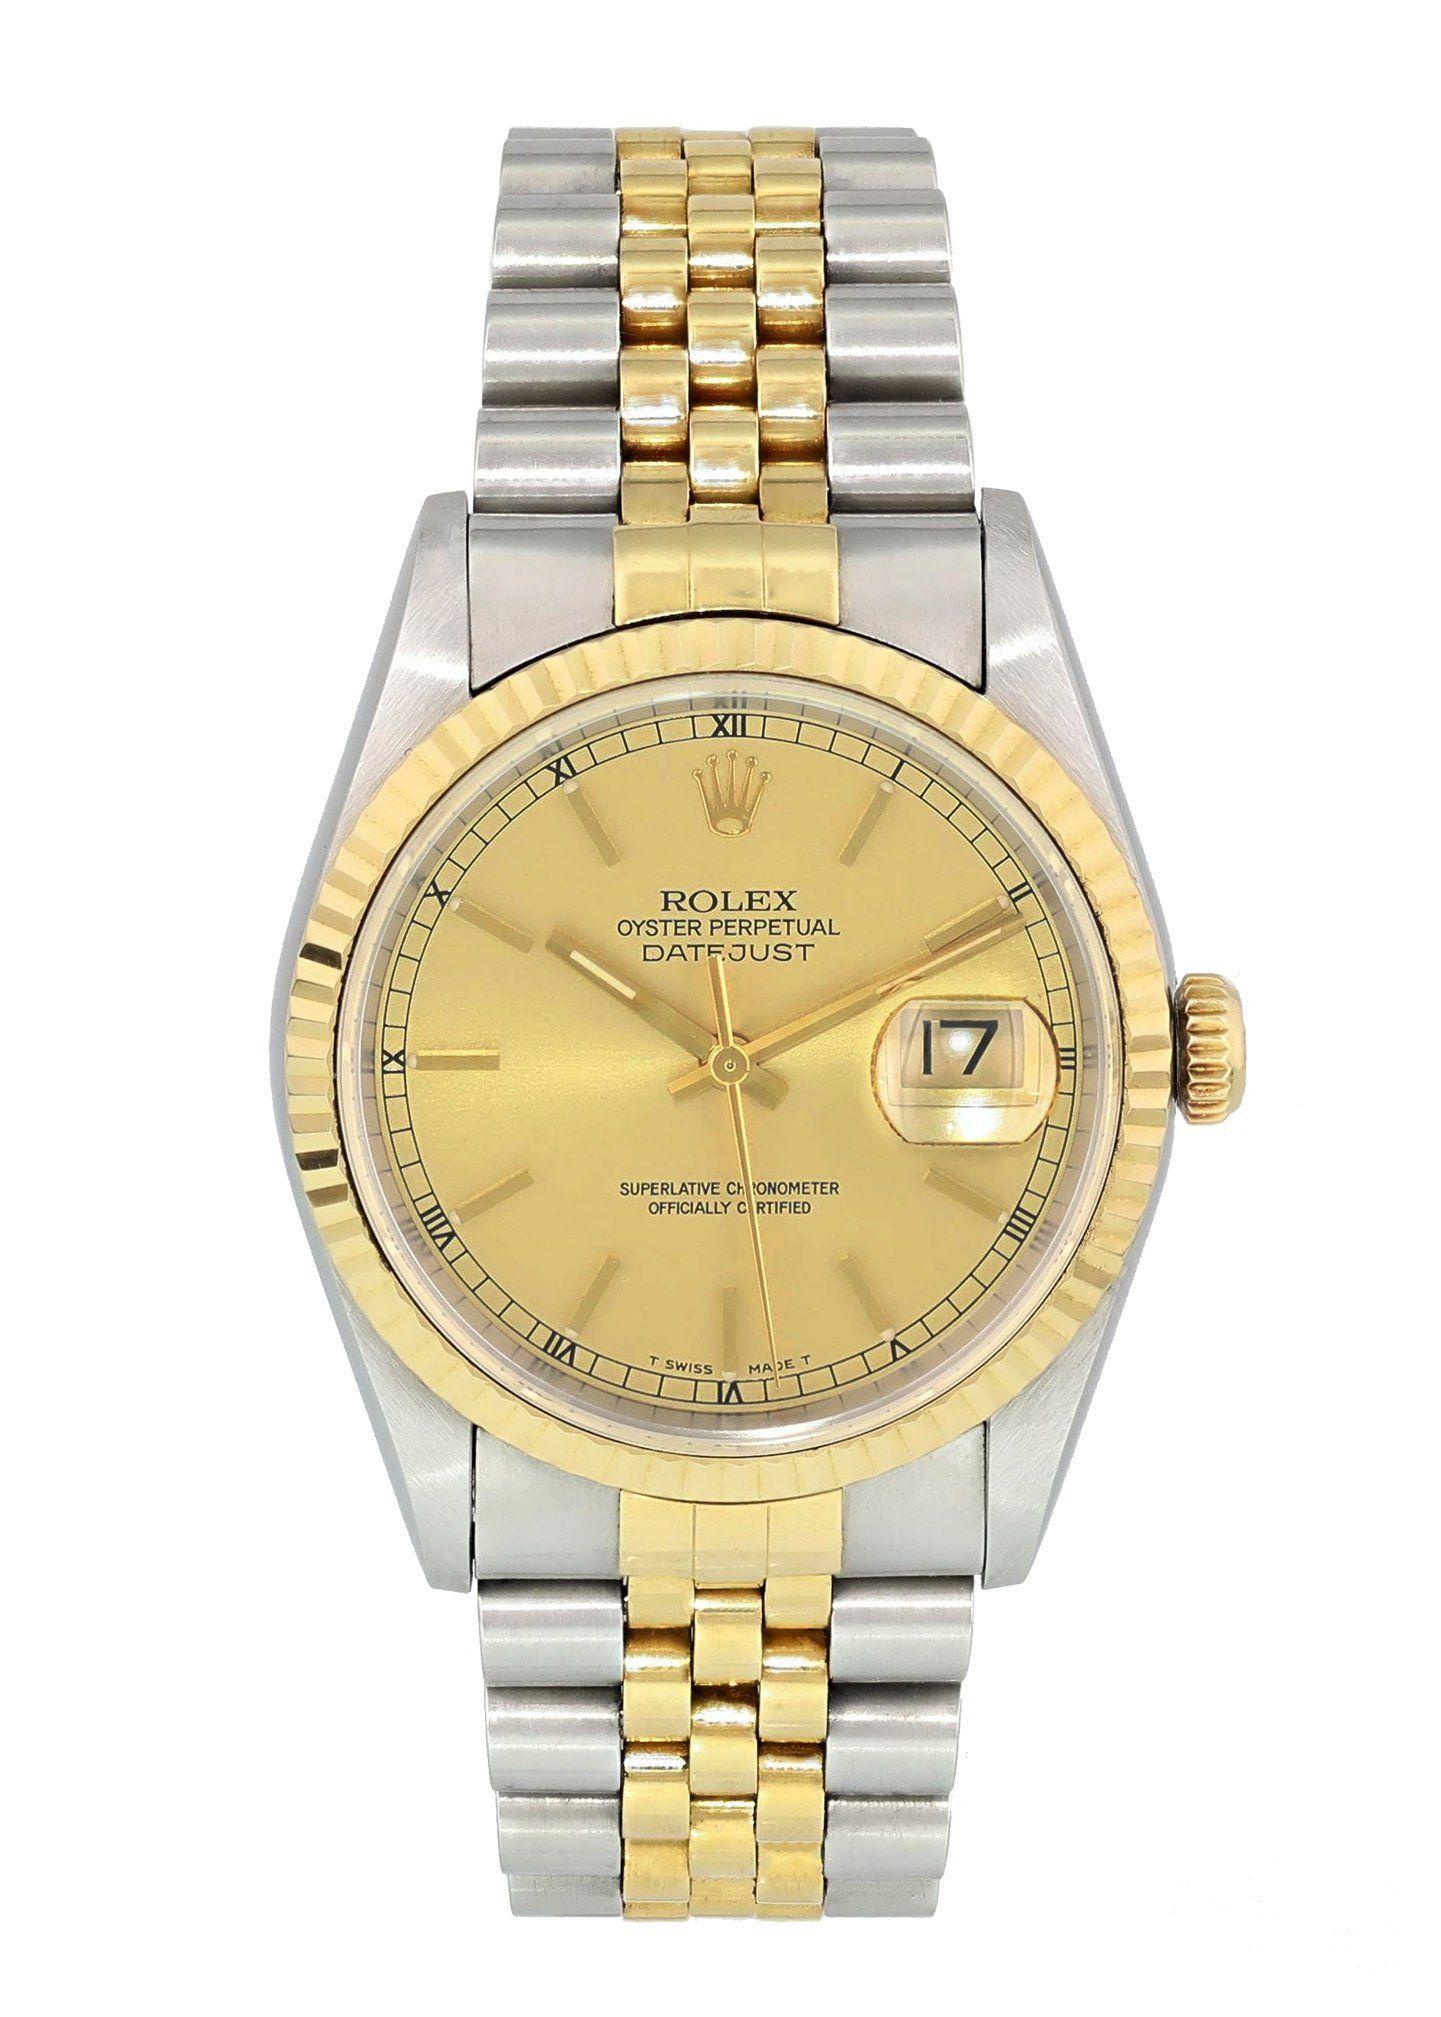 Rolex Datejust 16233 Men Watch. 
36mm Stainless Steel case. 
Yellow Gold Stationary bezel. 
Champagne dial with Luminous gold hands and index hour markers. 
Minute markers on the outer dial. 
Date display at the 3 o'clock position. 
Two Tone